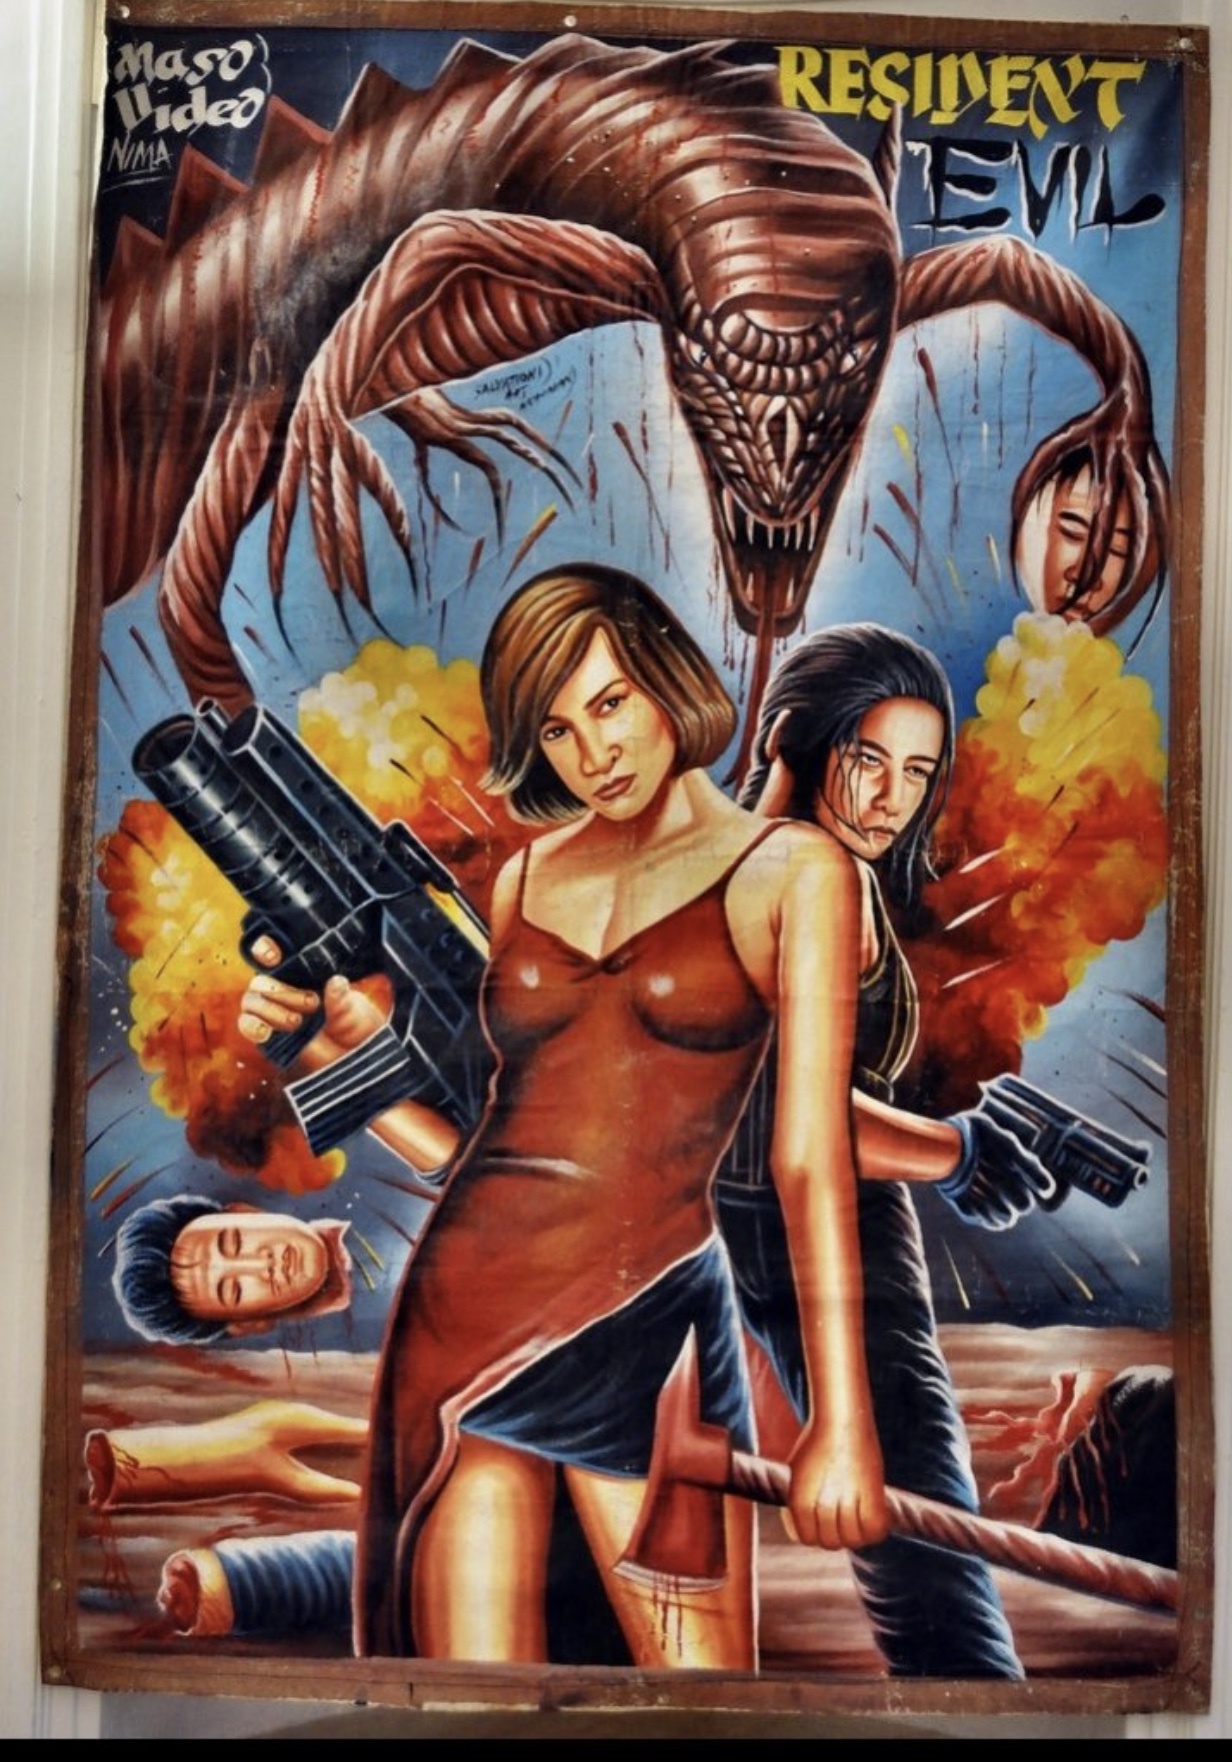 ghana hand painted movie posters - Alas Video Resident Evil